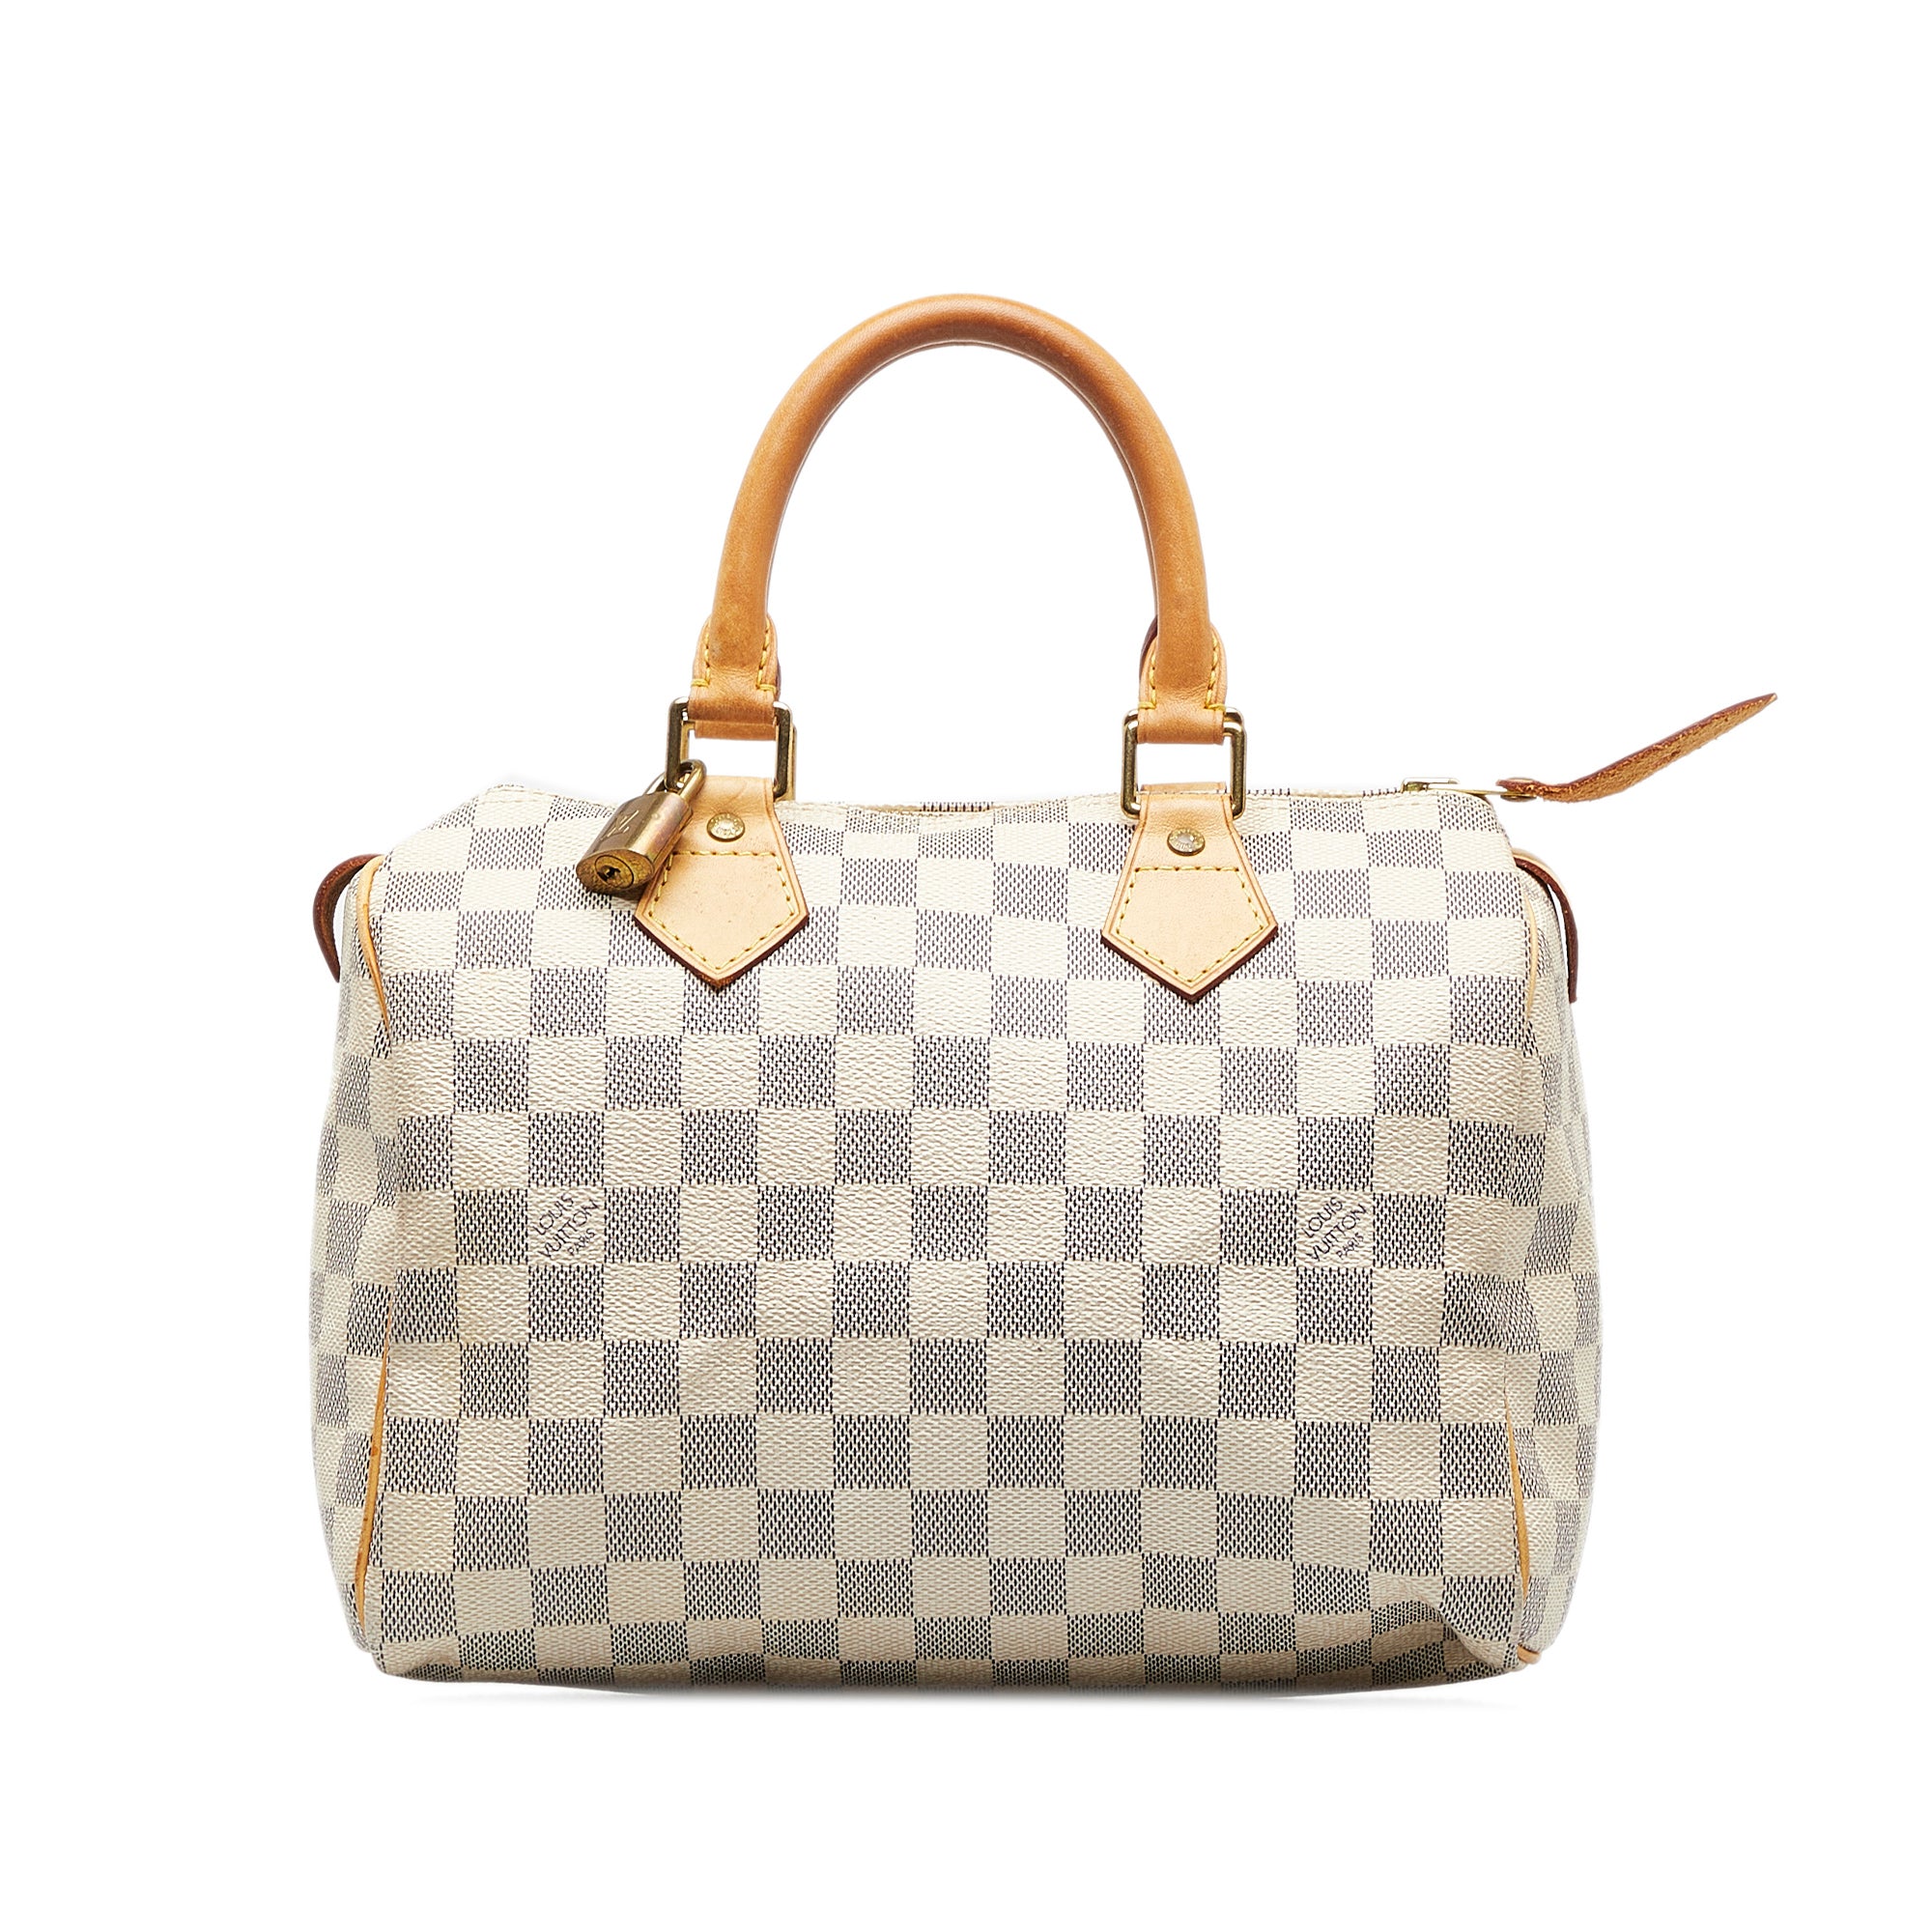 Louis Vuitton Speedy 30 in perforated. Canvas. It is so different